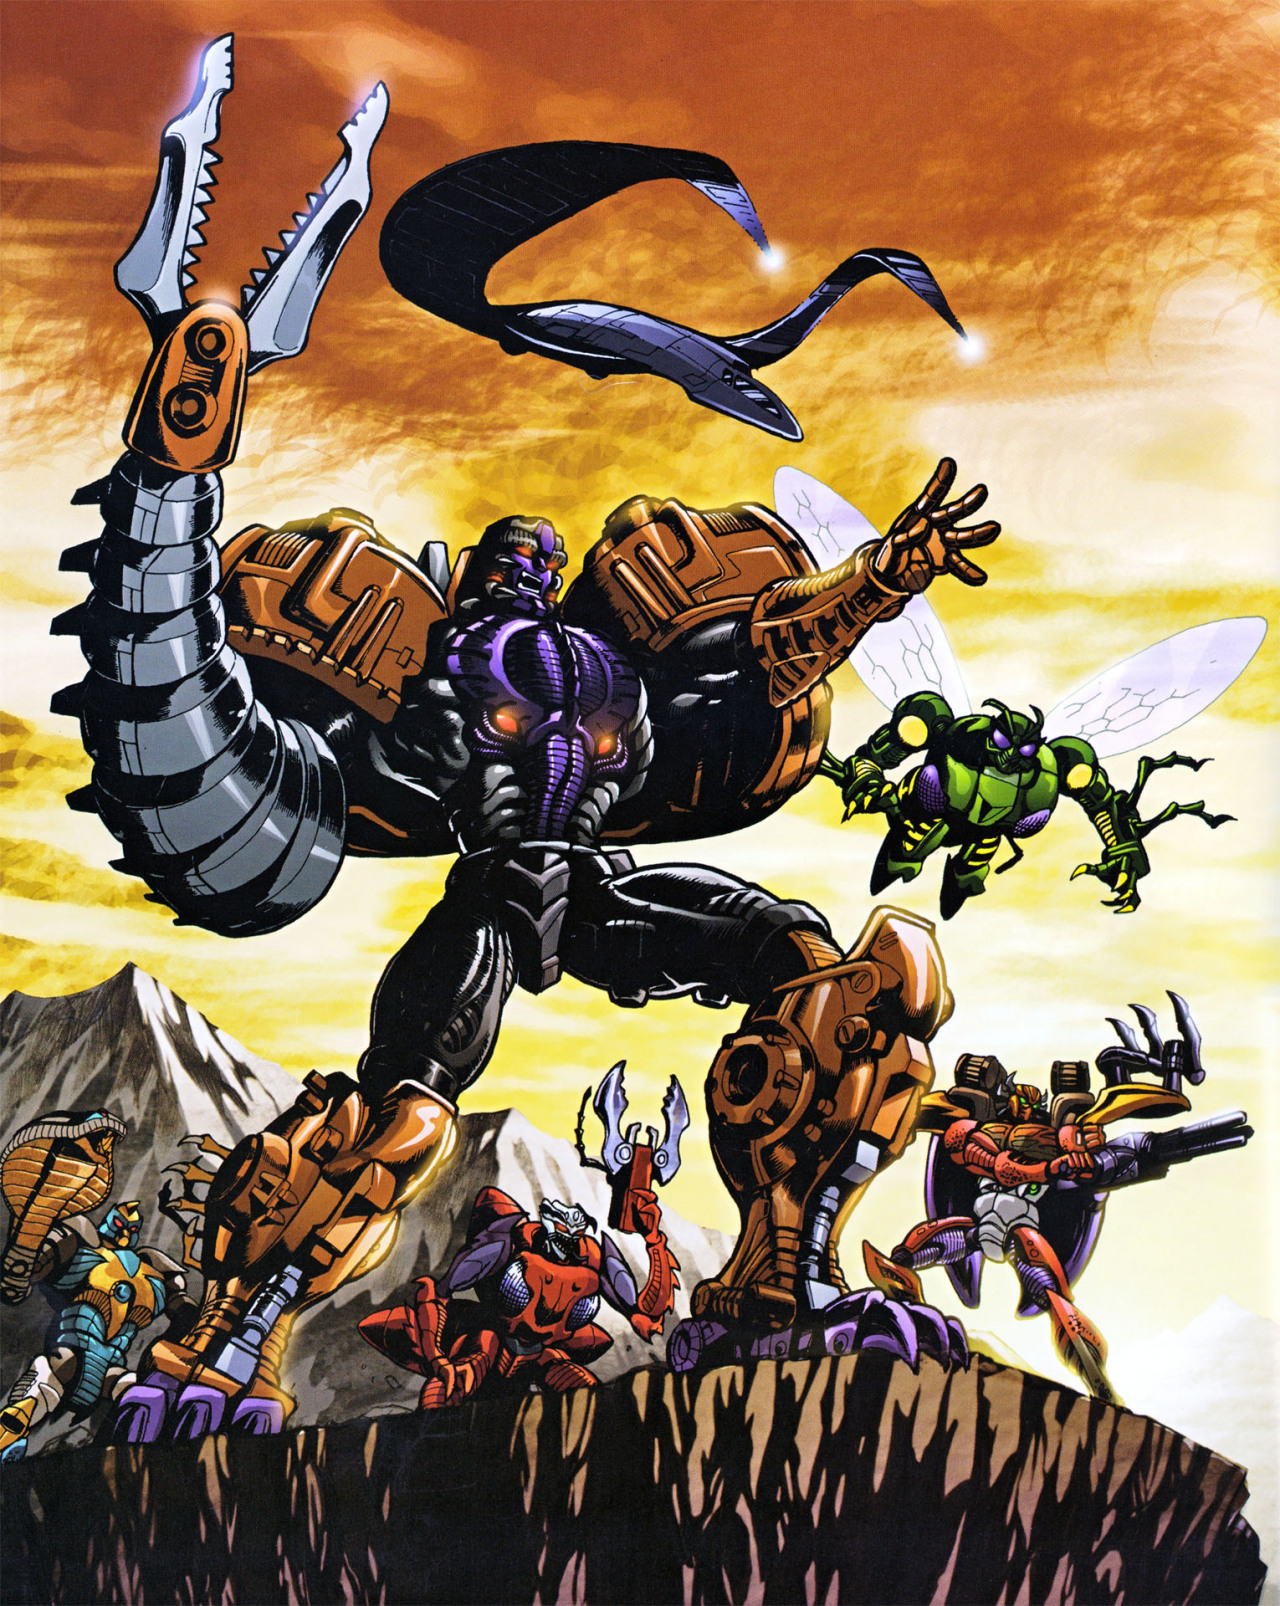 monzo12782:
“ Yeesssss…
Transmetal Megatron, Quickstrike, Inferno, Waspinator and Rampage, plus Ravage’s TransWarp Cruiser. Art by Guido Guidi and colors by Hi-Fi Design. Scan from Genesis: The Art of Transformers.
”